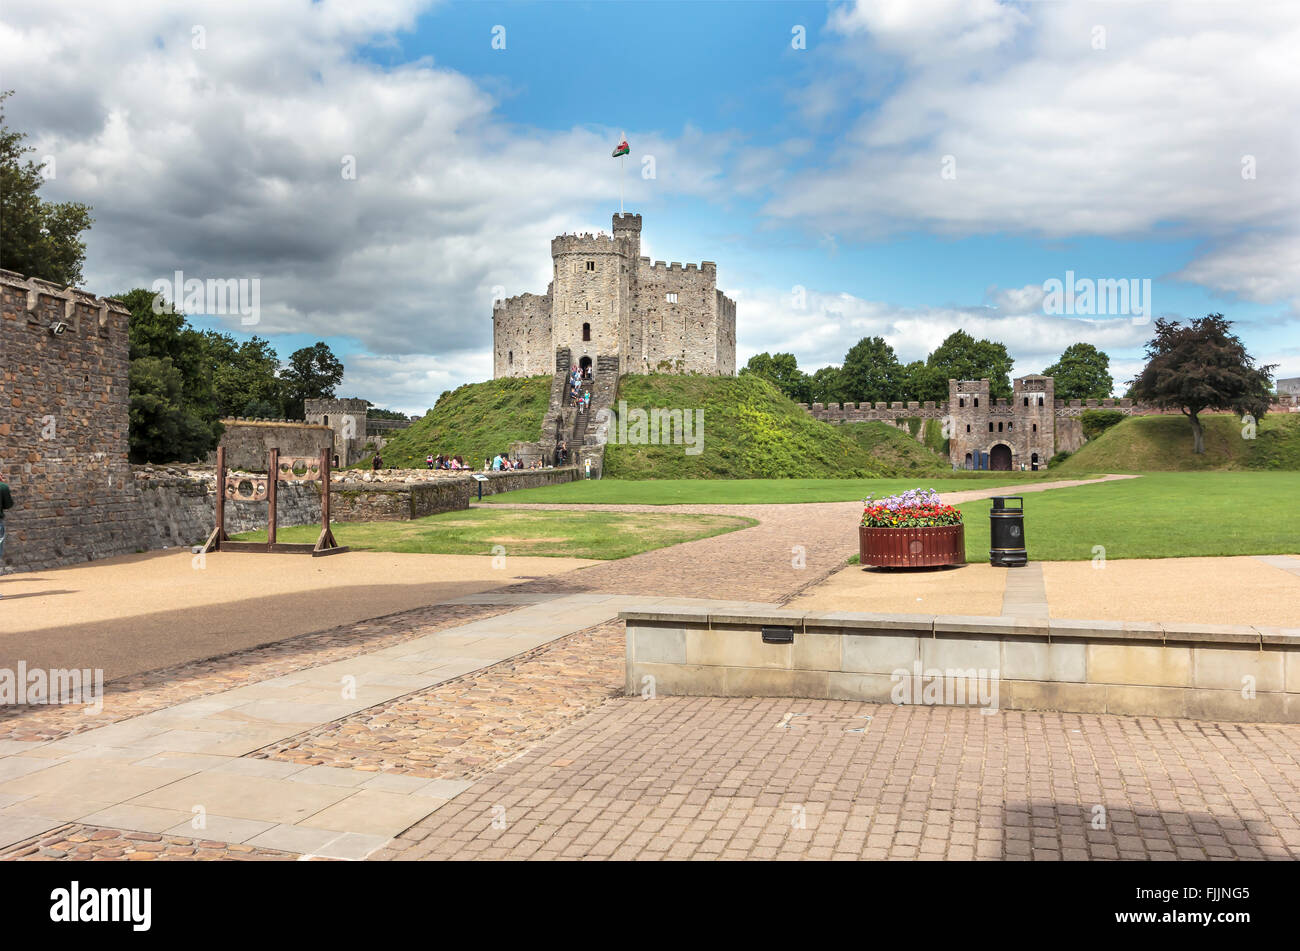 Cardiff Castle a medieval castle located in the city centre of Cardiff, Wales. Stock Photo